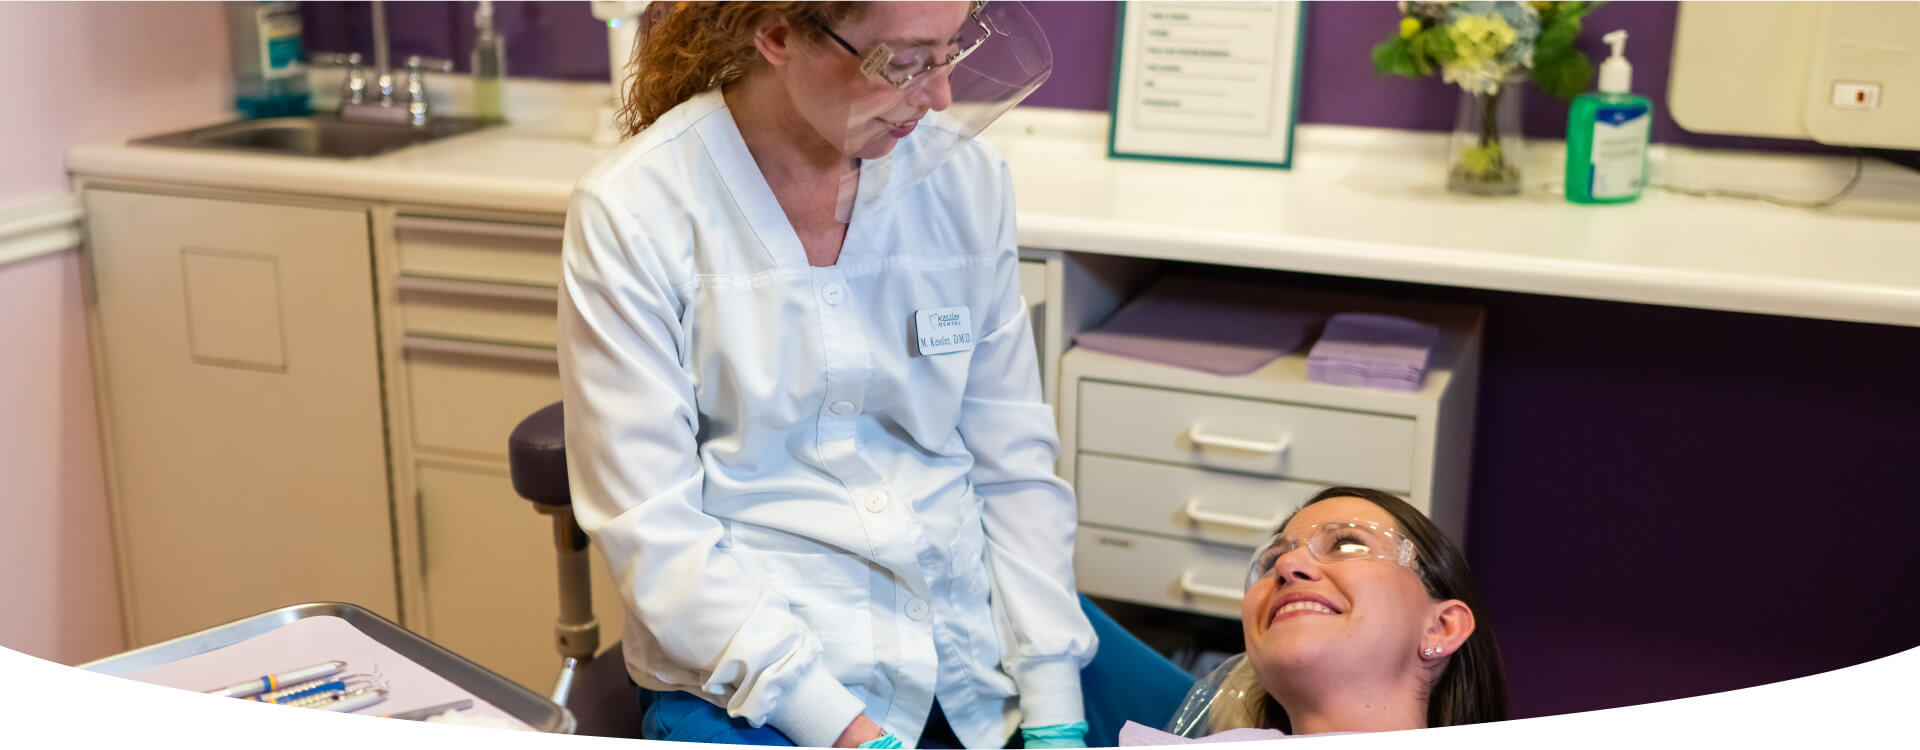 A Smiling Patient Looking At The Dentist